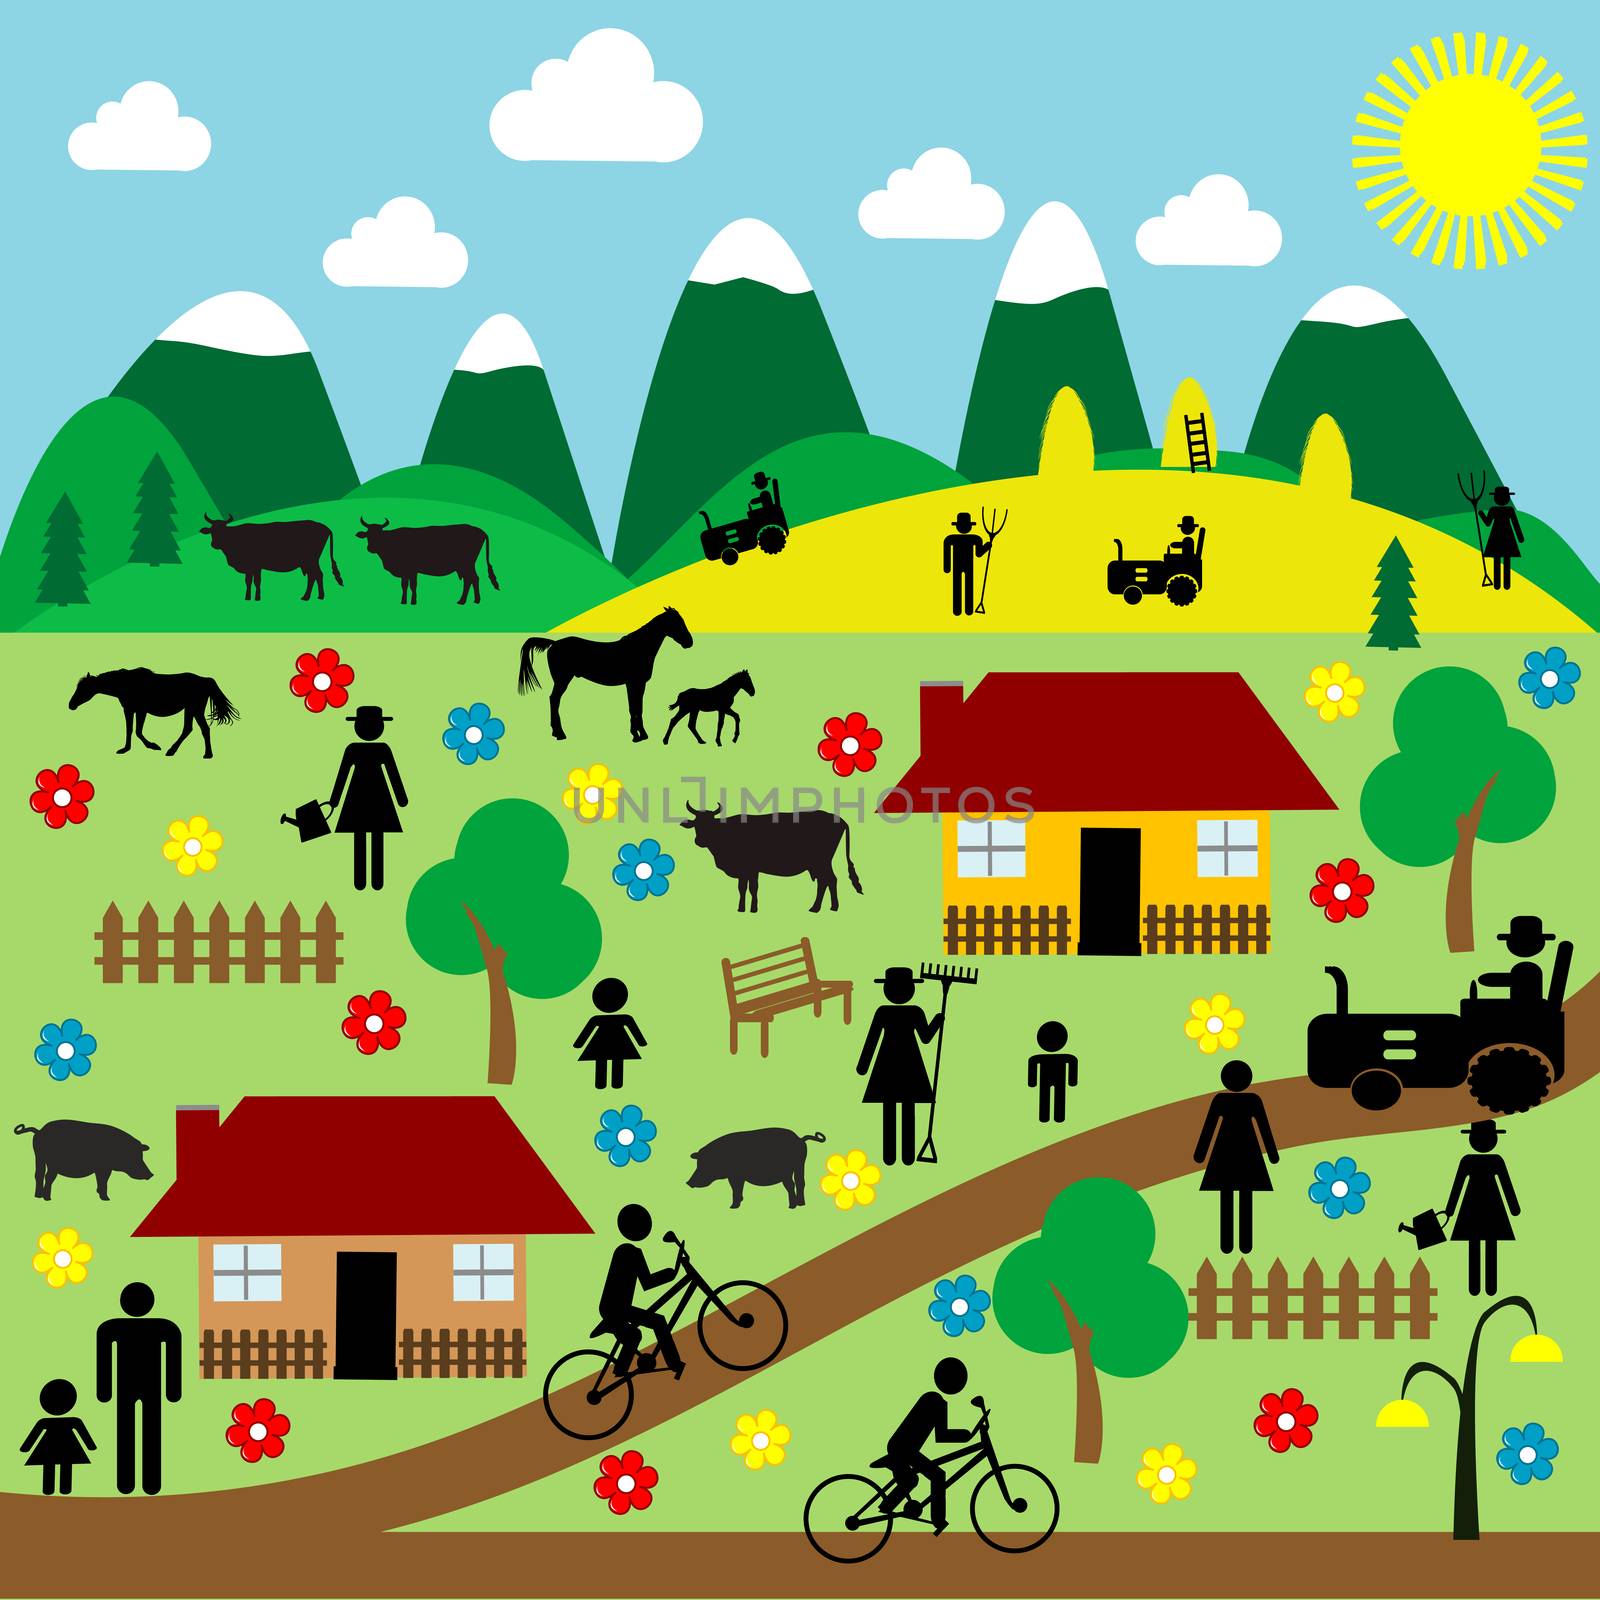 Countryside scene with pictograms with domestic animals and peasants